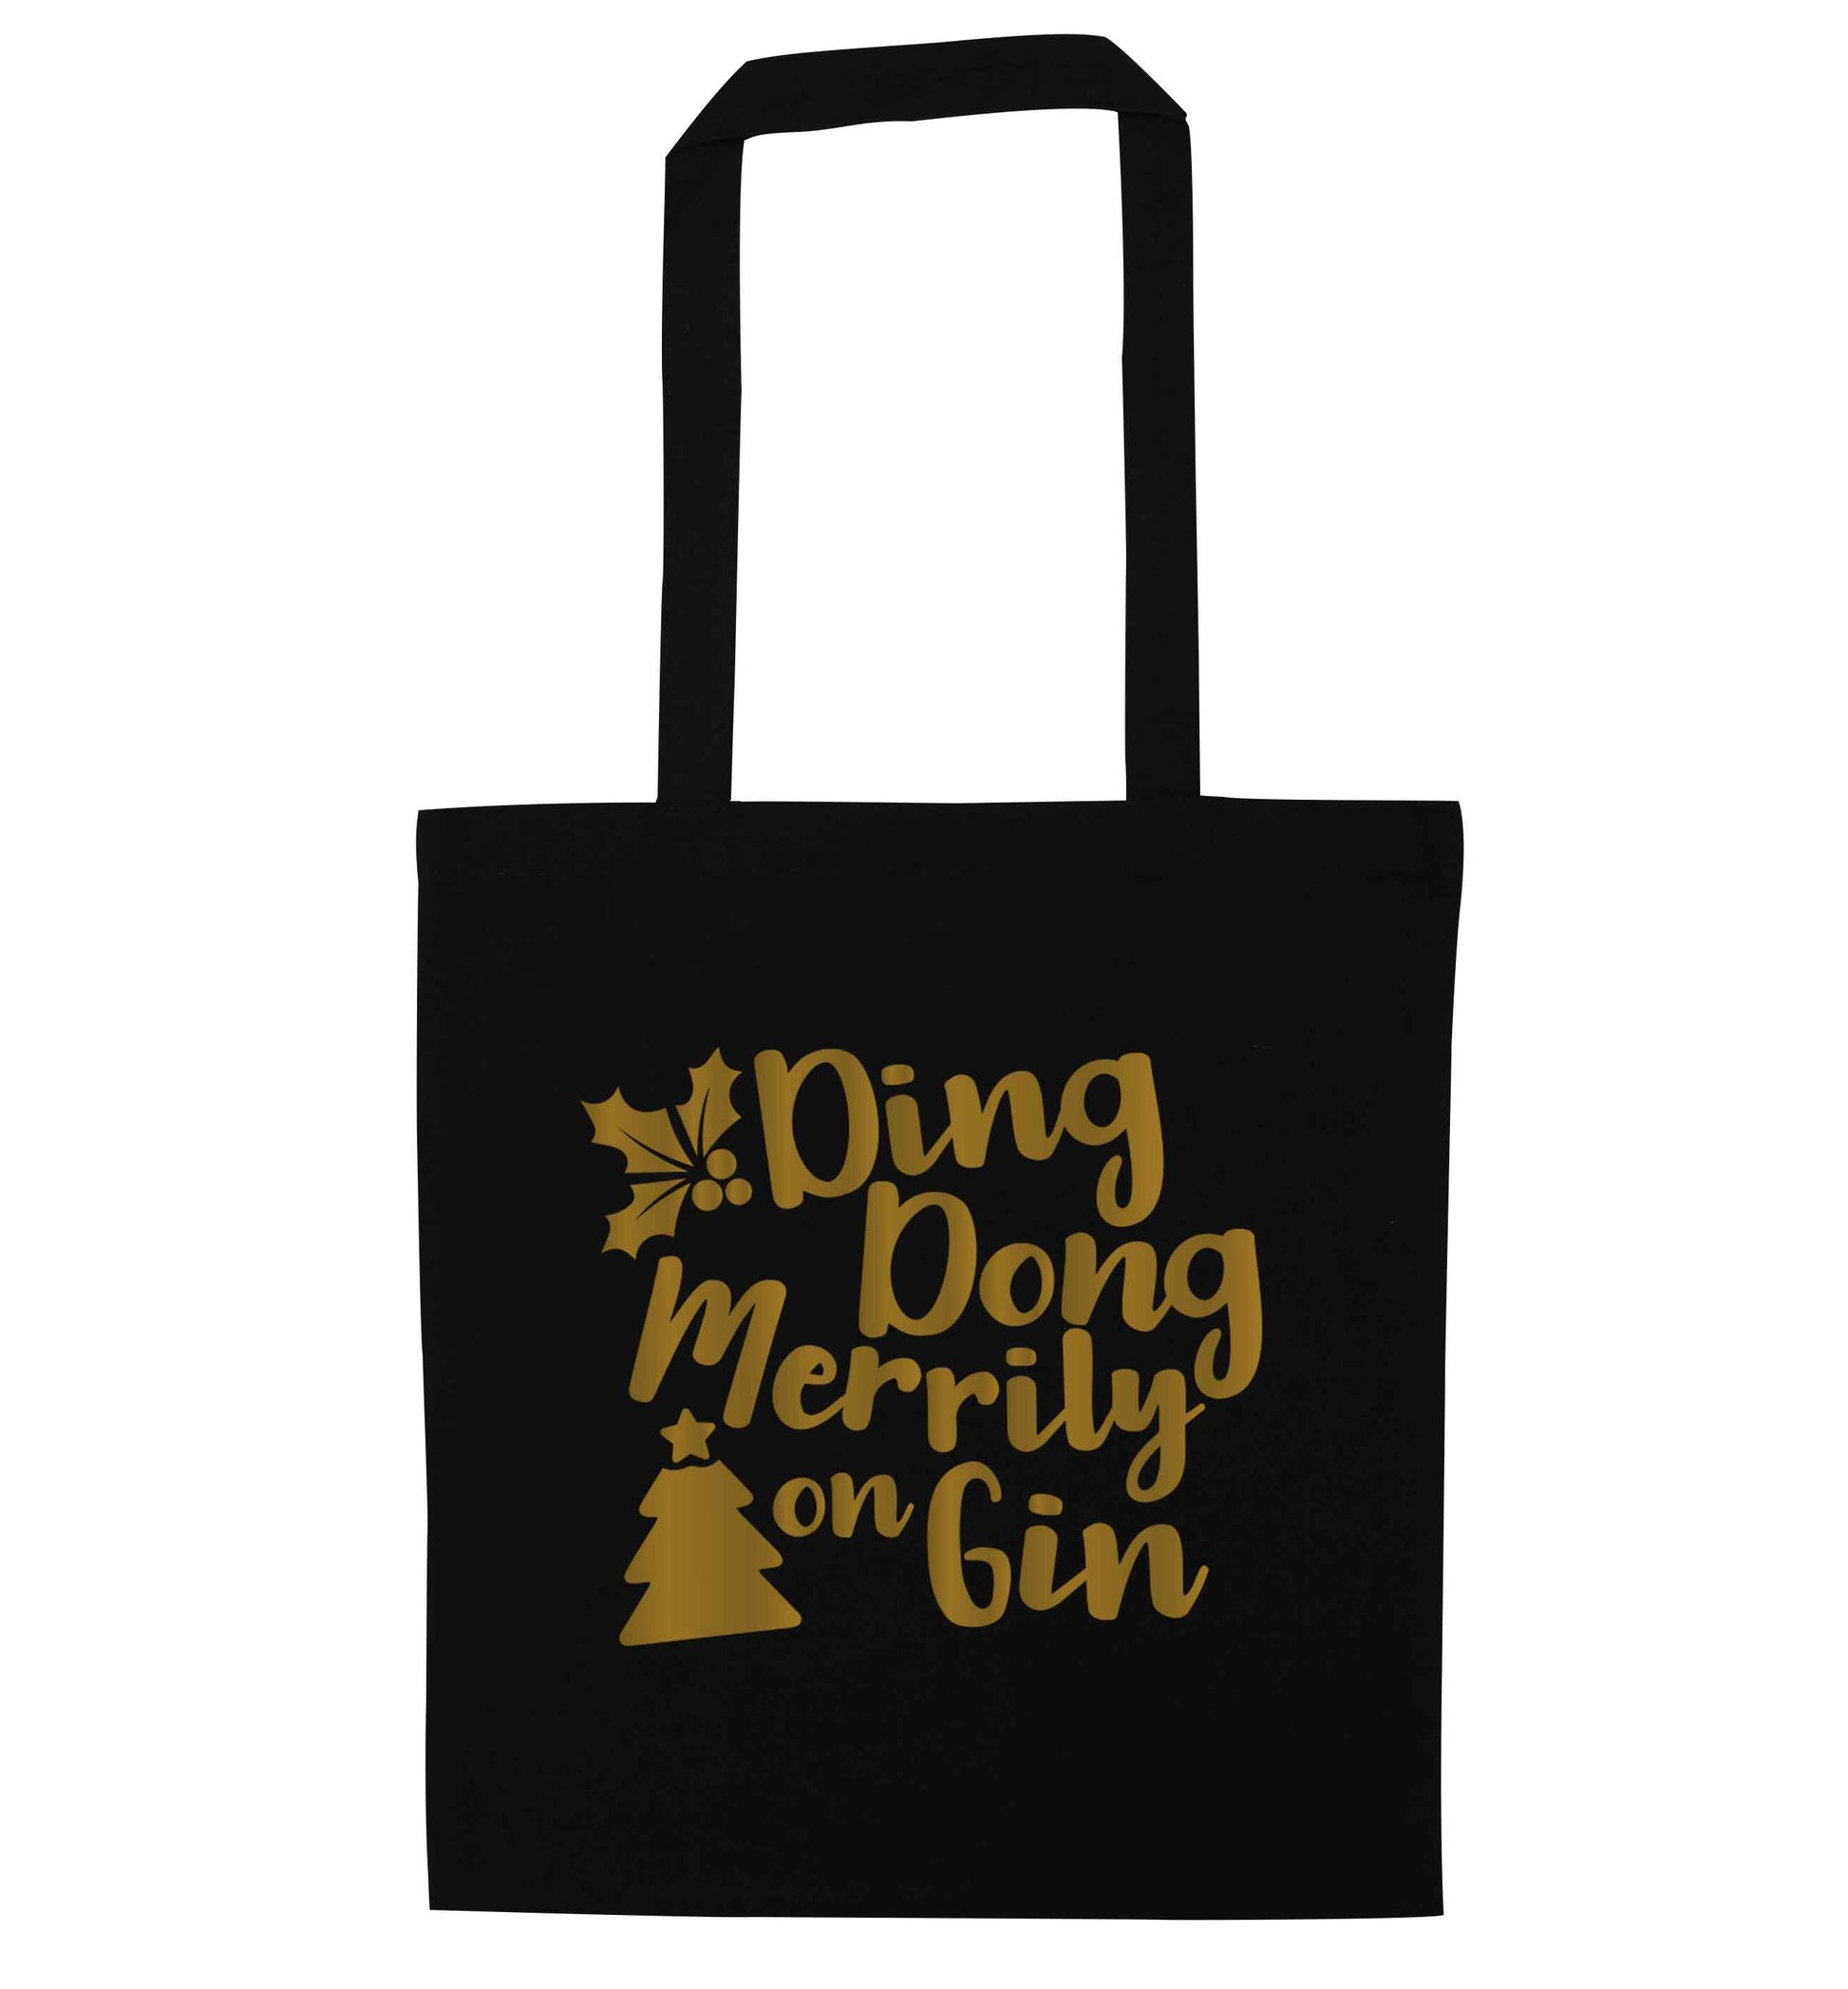 Ding dong merrily on gin black tote bag